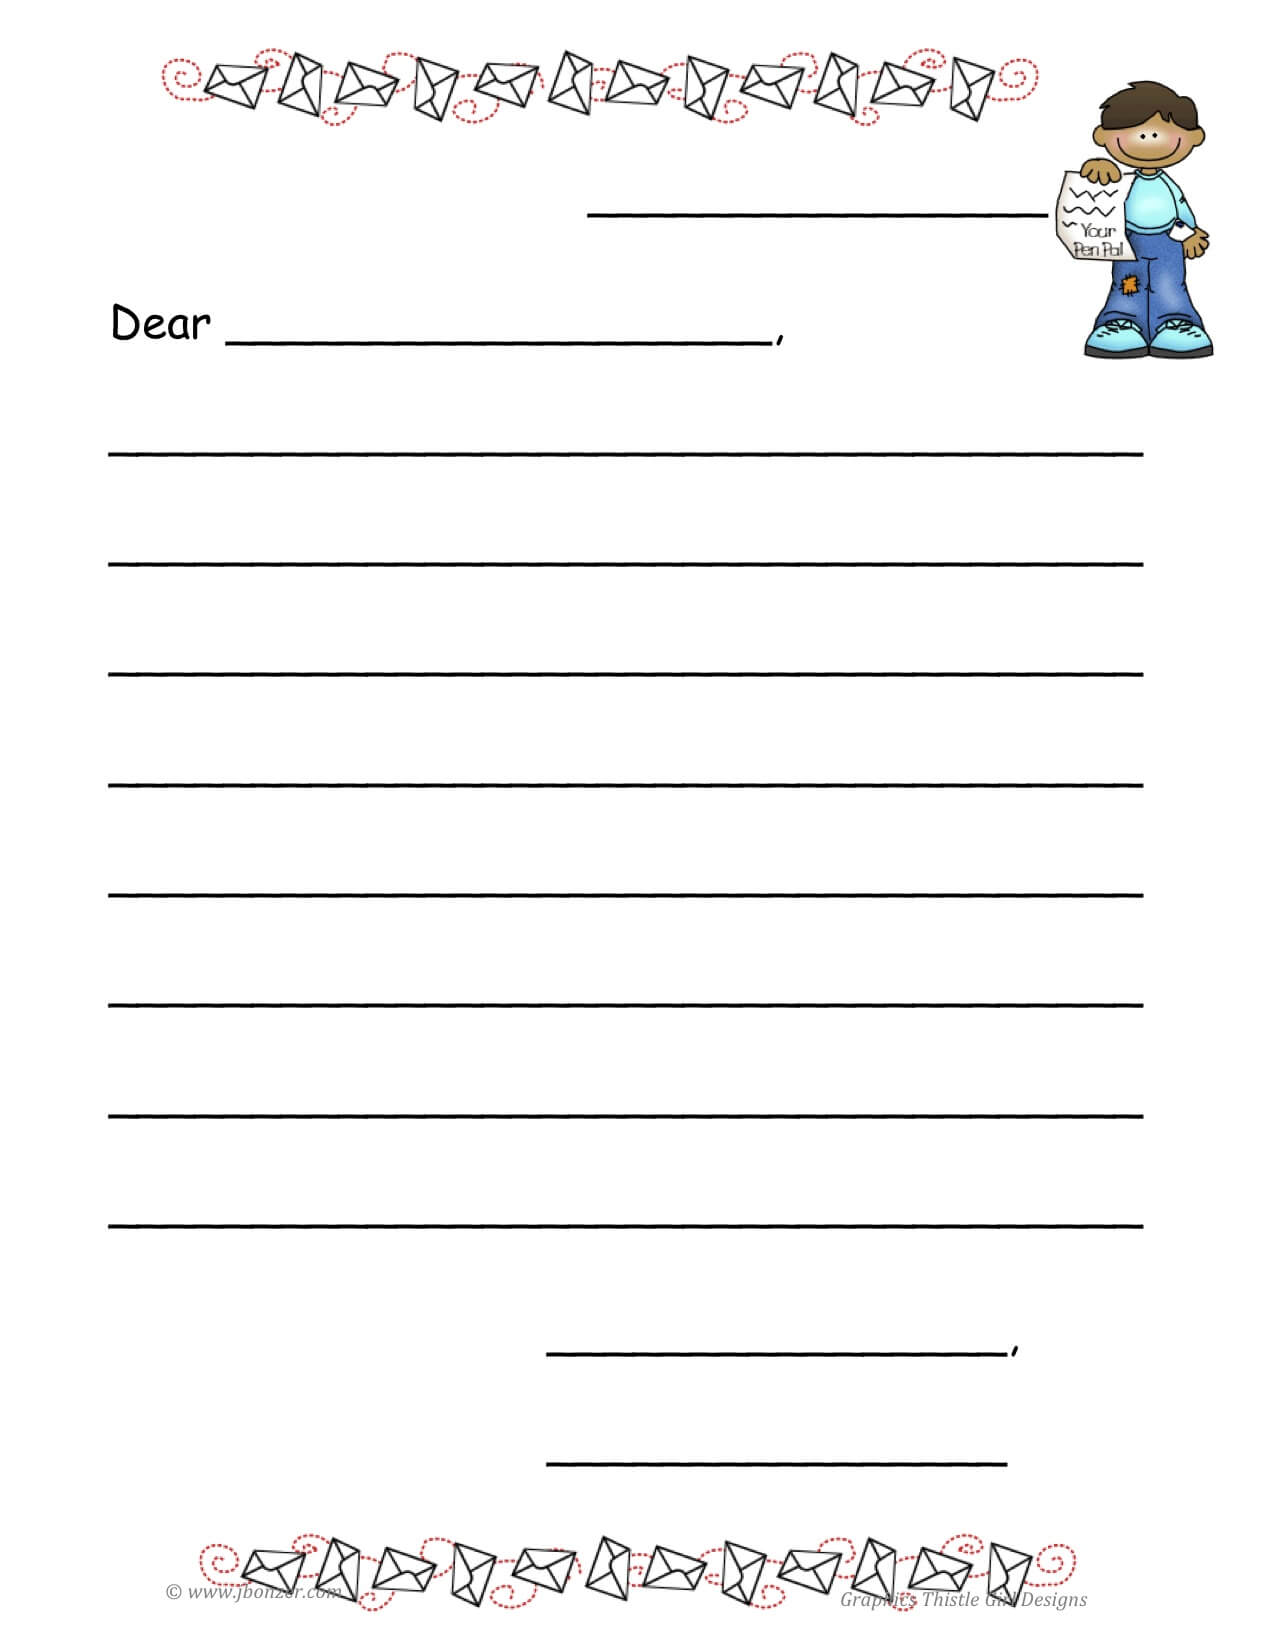 13 Best Photos Of Friendly Letter Templates Printable Throughout Blank Letter Writing Template For Kids